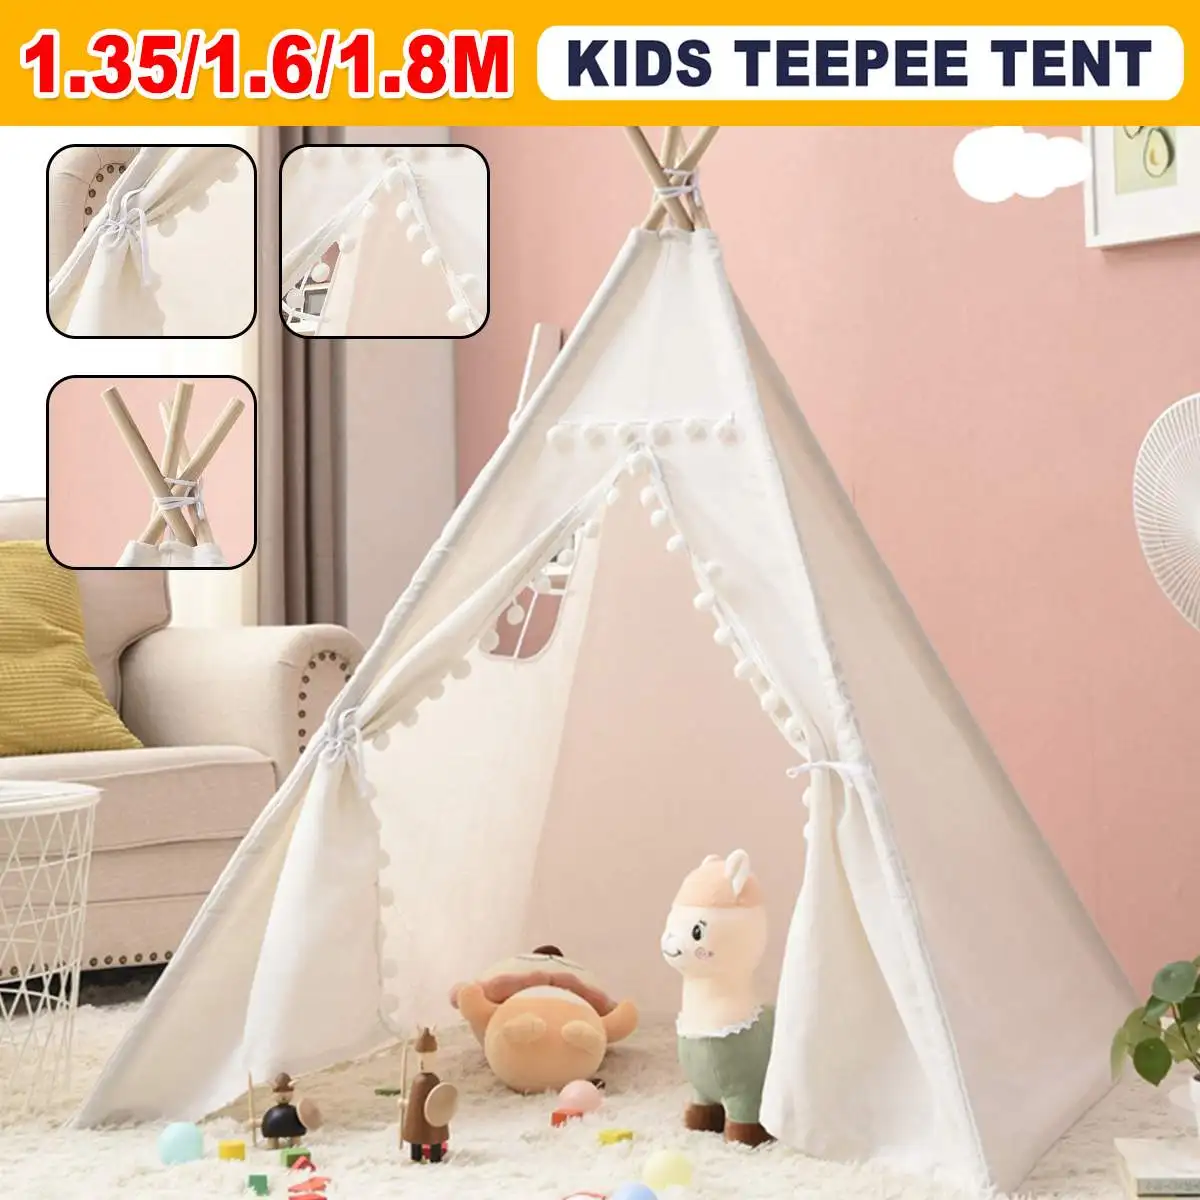 Kids Teepee Wigwam Childrens Play Tent Childs Garden Foldable Out /Indoor UK 